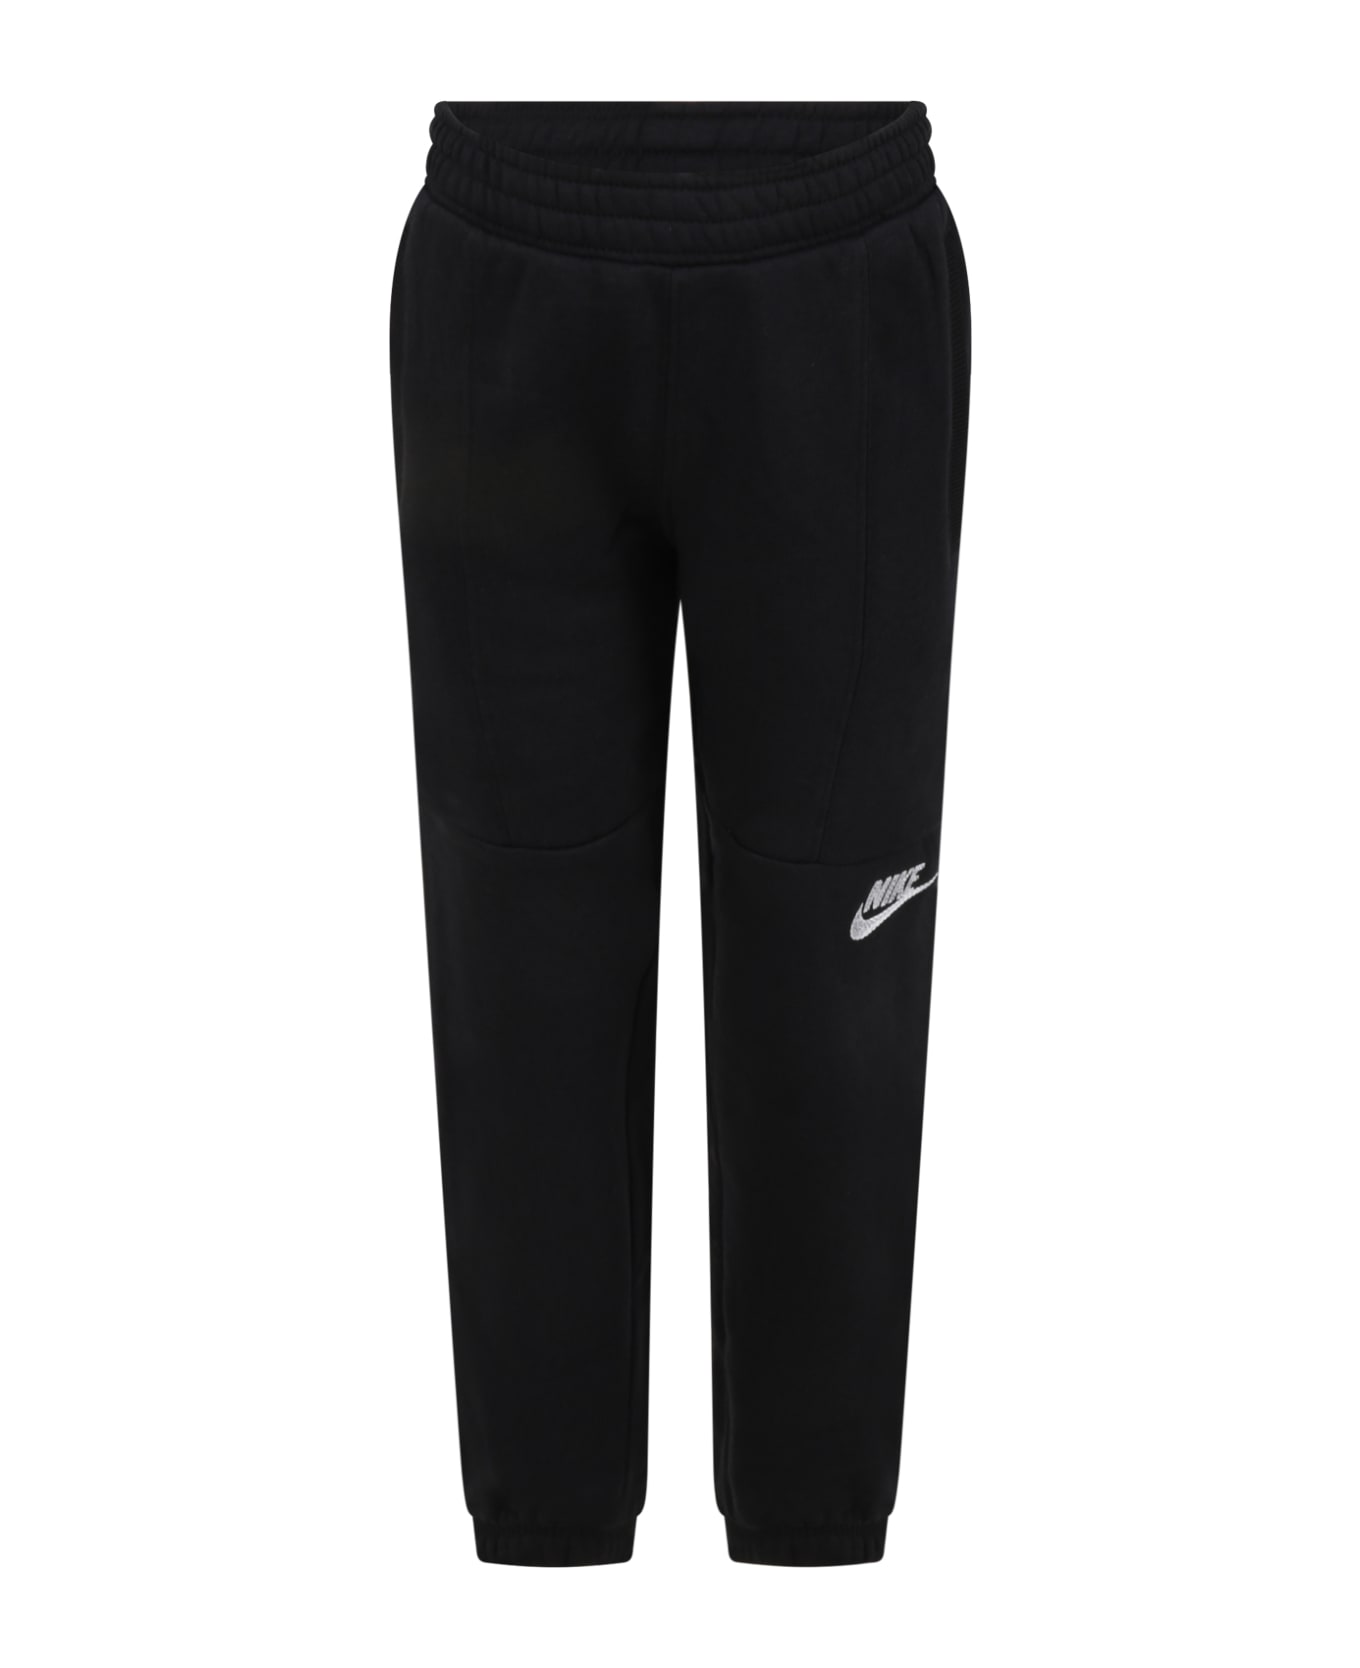 Nike Black Sweatpants For Boy With Double Logo - Black